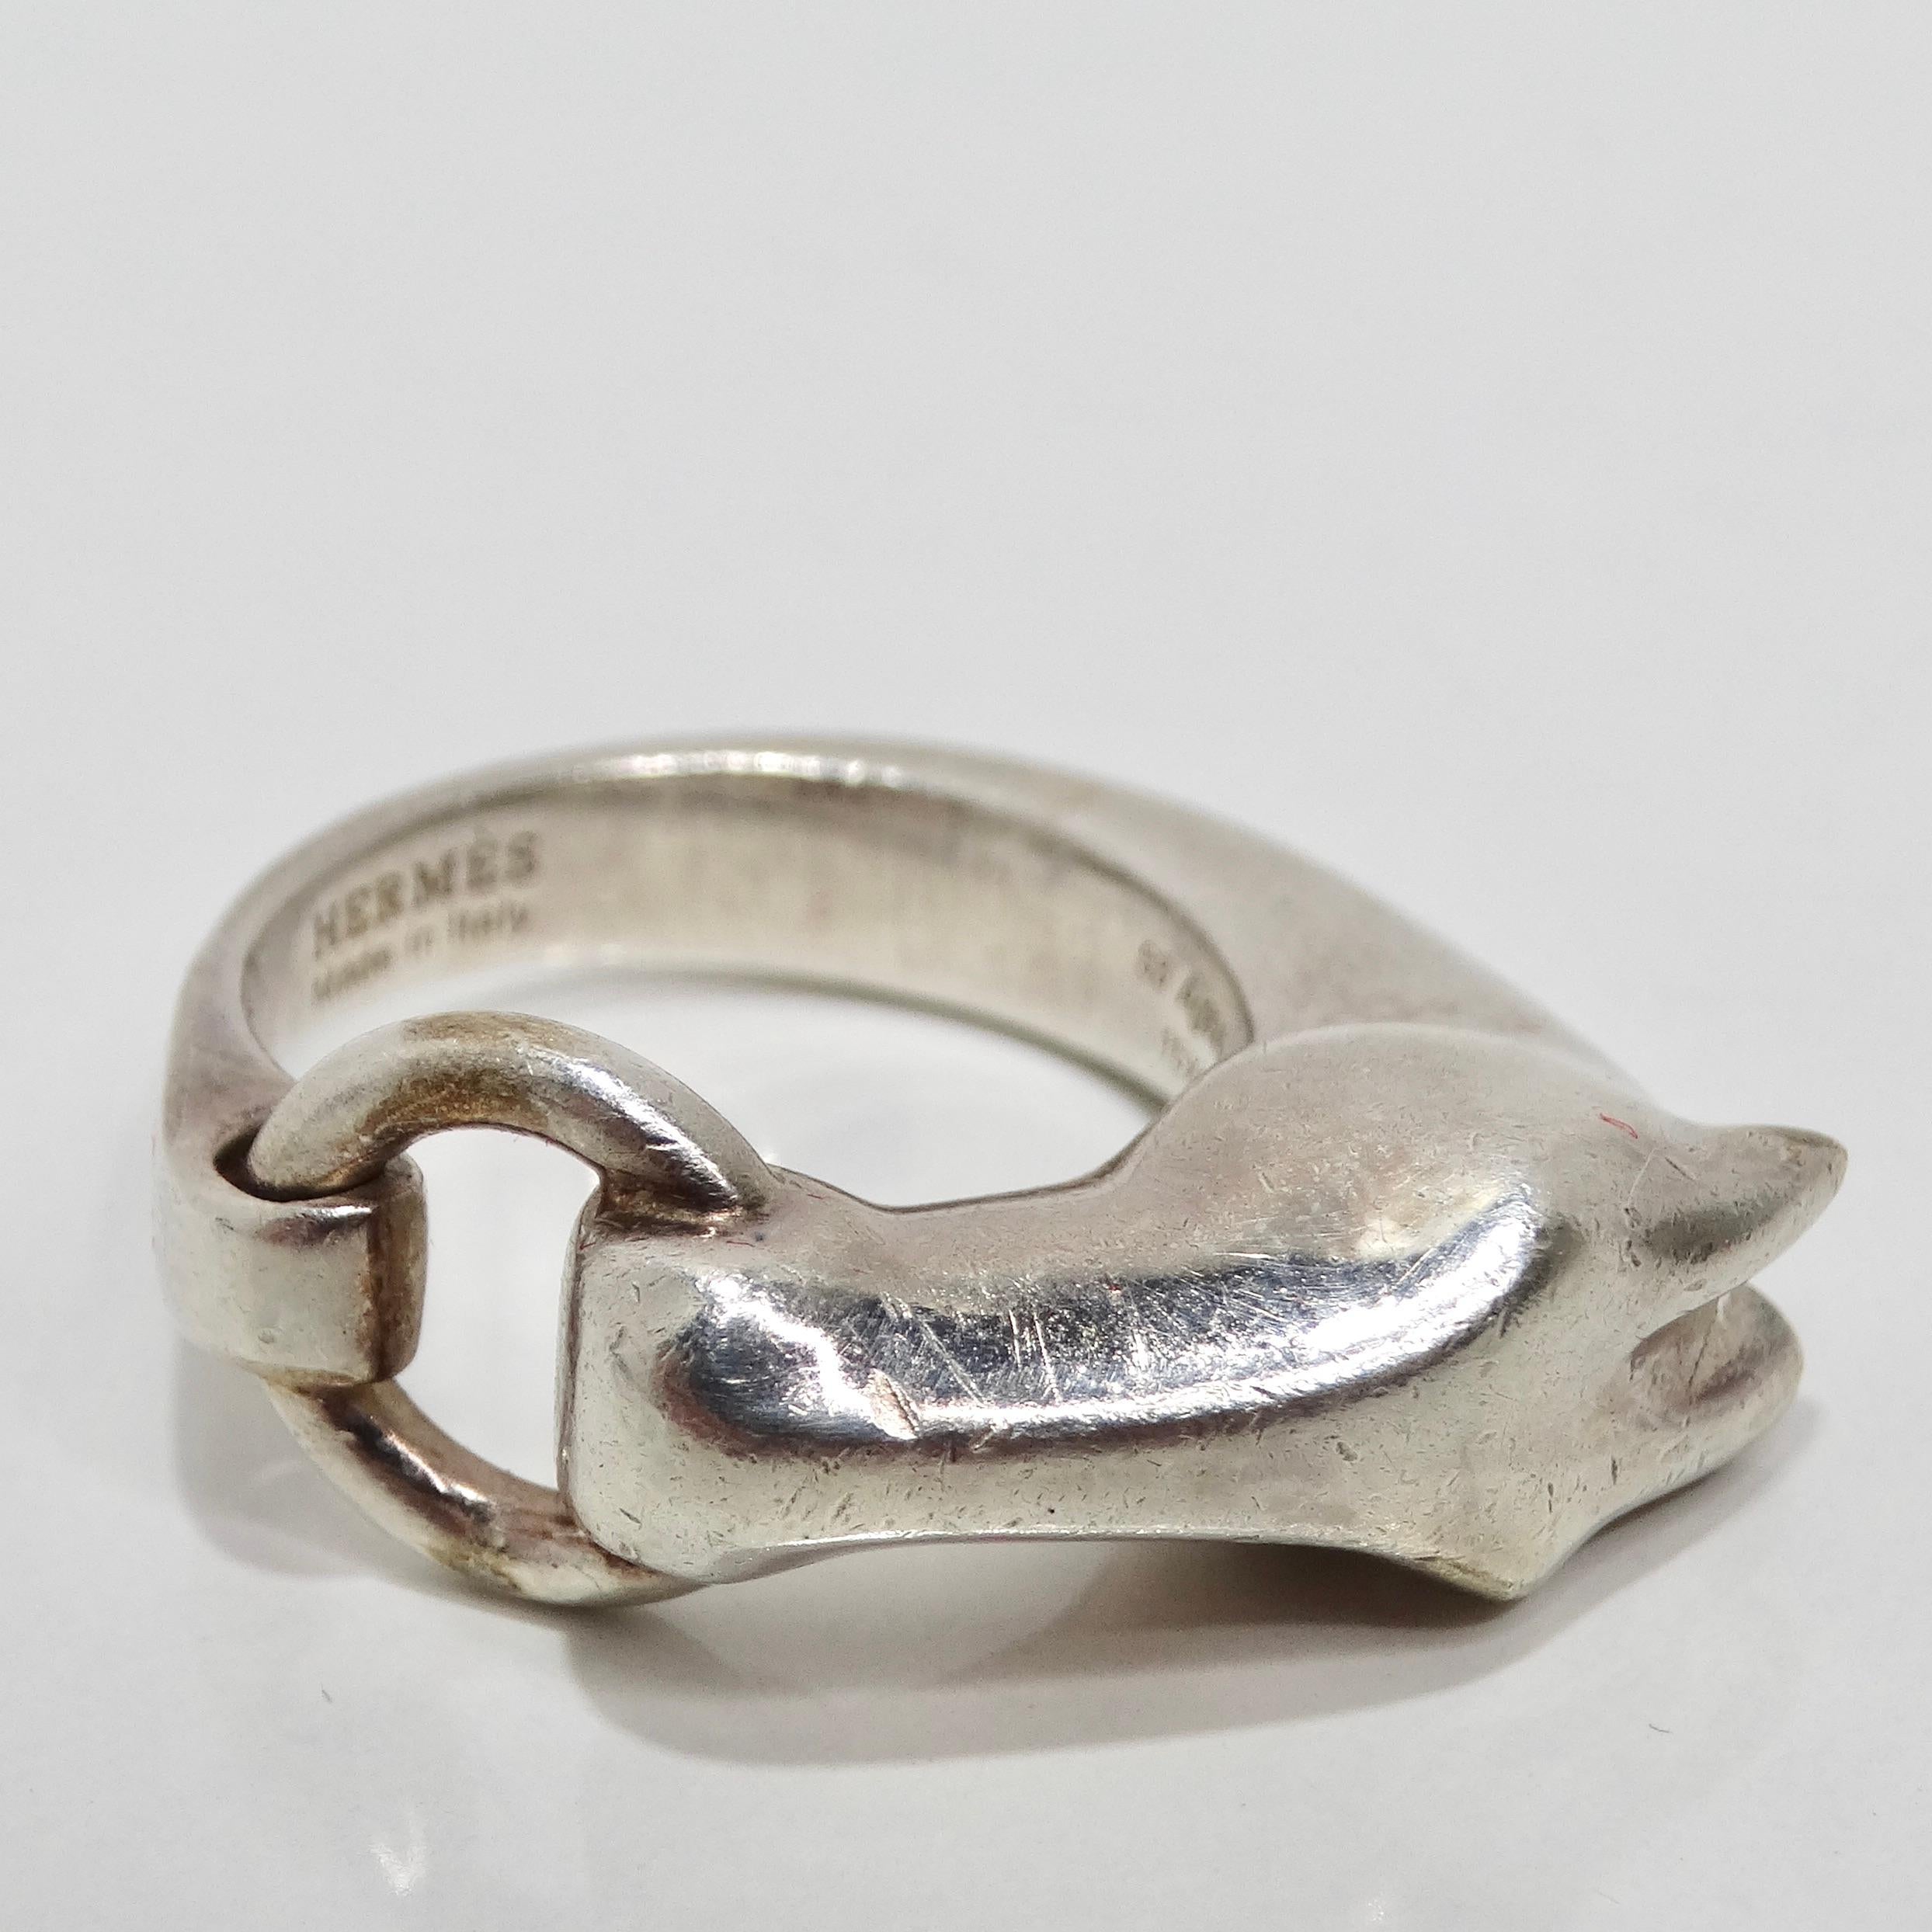 Hermes 1990s Silver Gallop Ring In Good Condition For Sale In Scottsdale, AZ